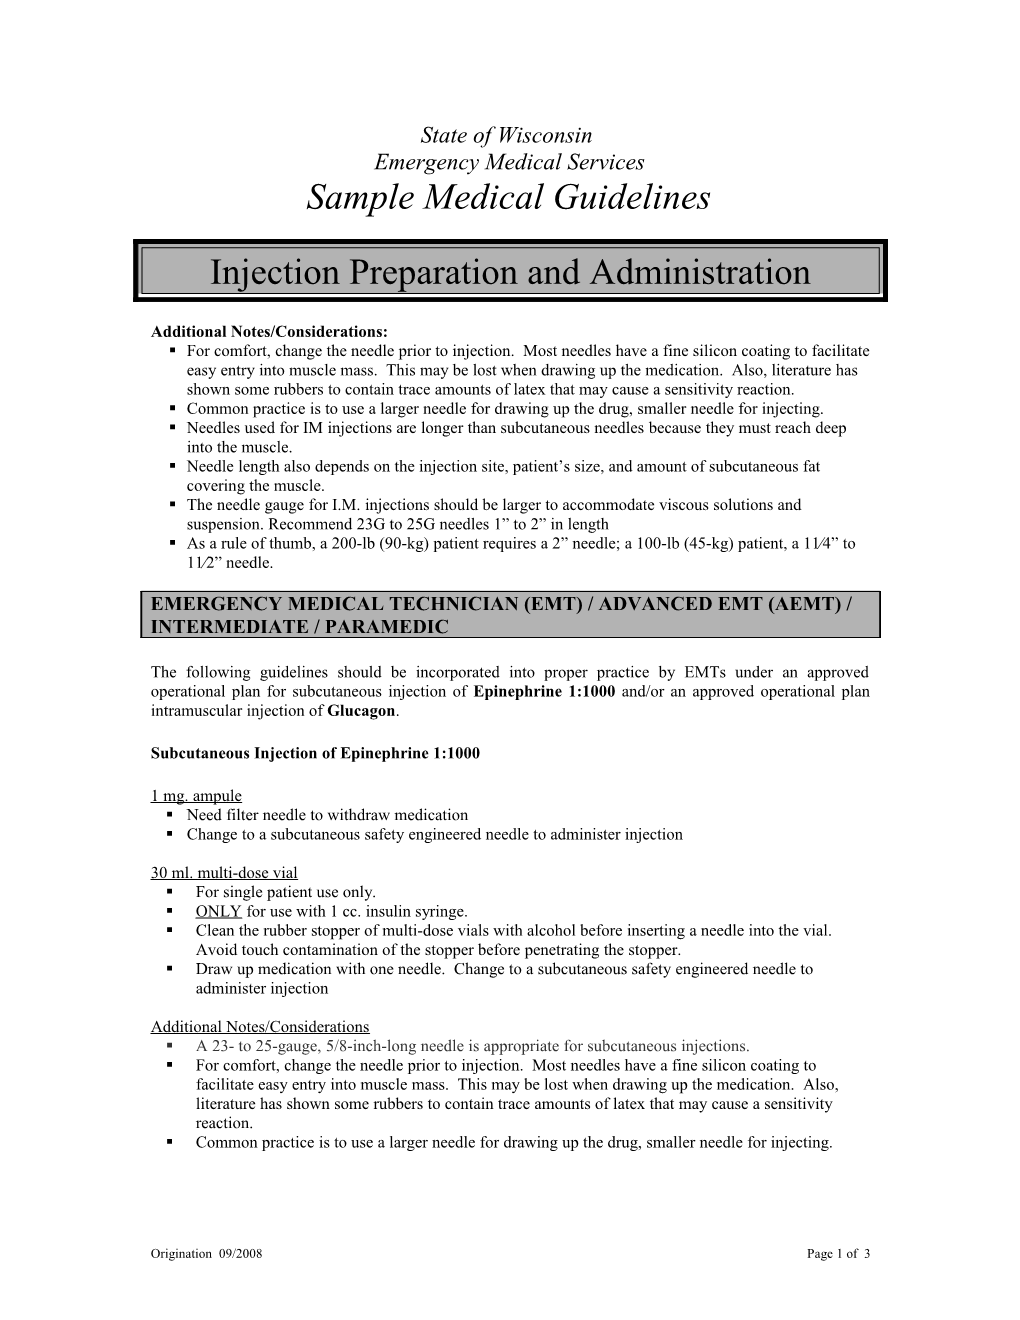 Injection Preparation and Administration Guideline